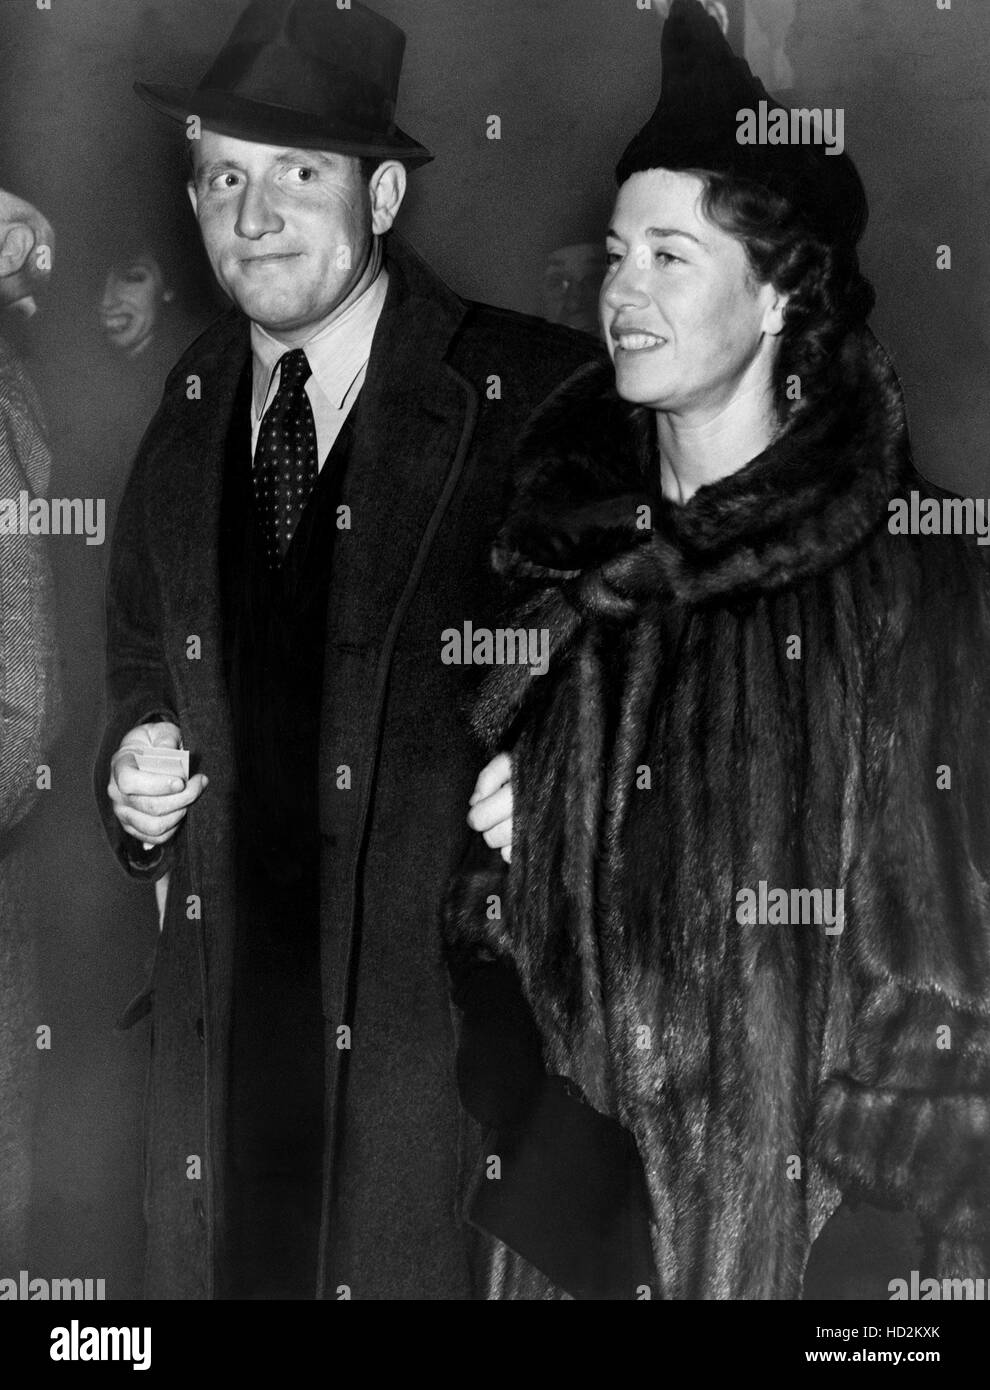 SPENCER TRACY and wife LOUISE TRACY attend premeiere of ADVENTURES OF TOM SAWYER, 1938 Stock Photo